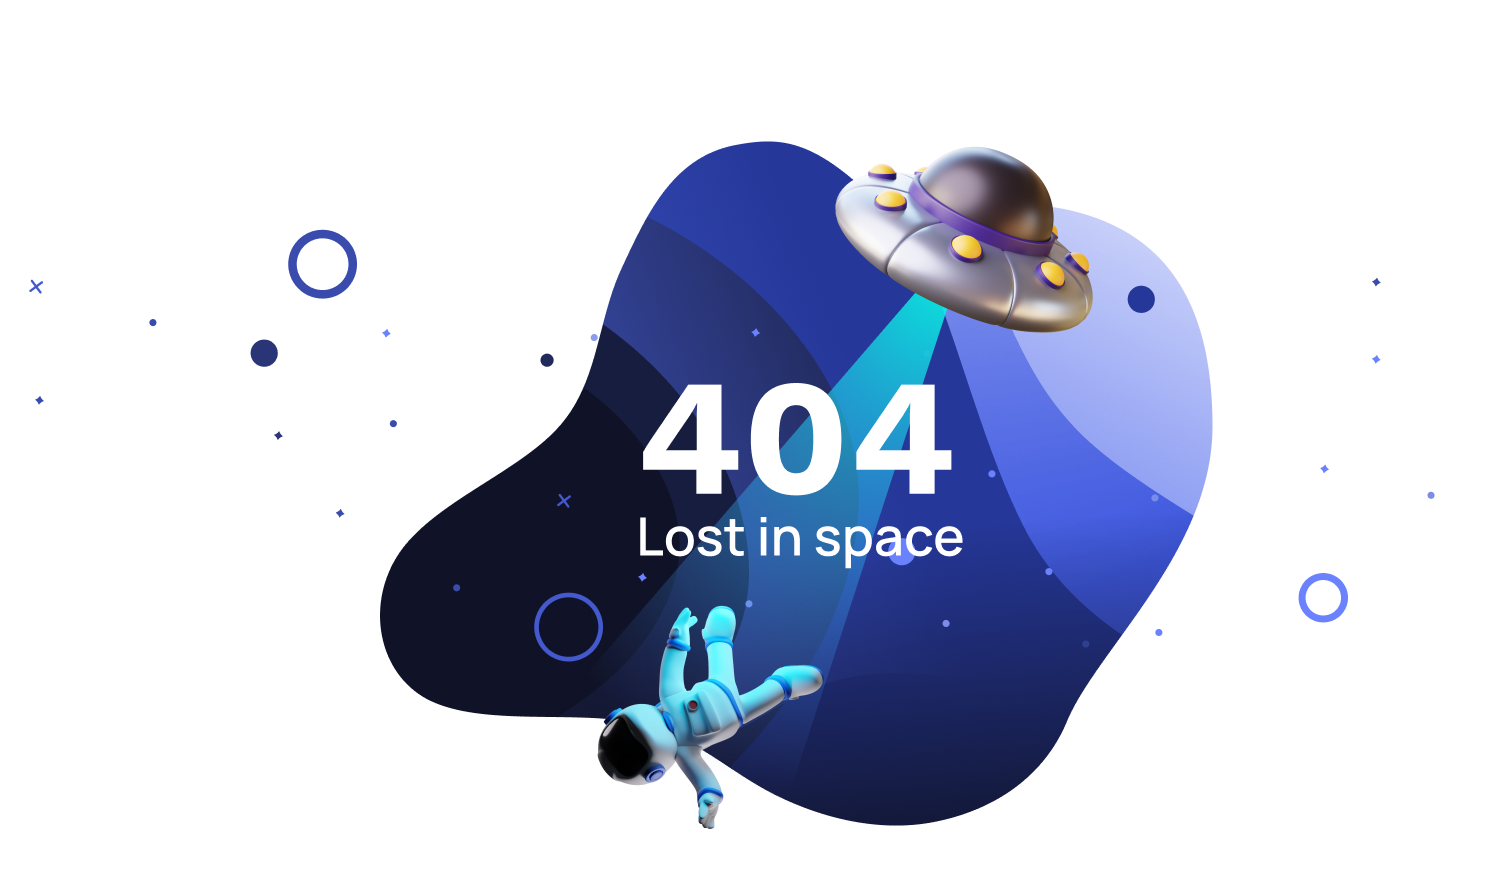 404 - Lost in space